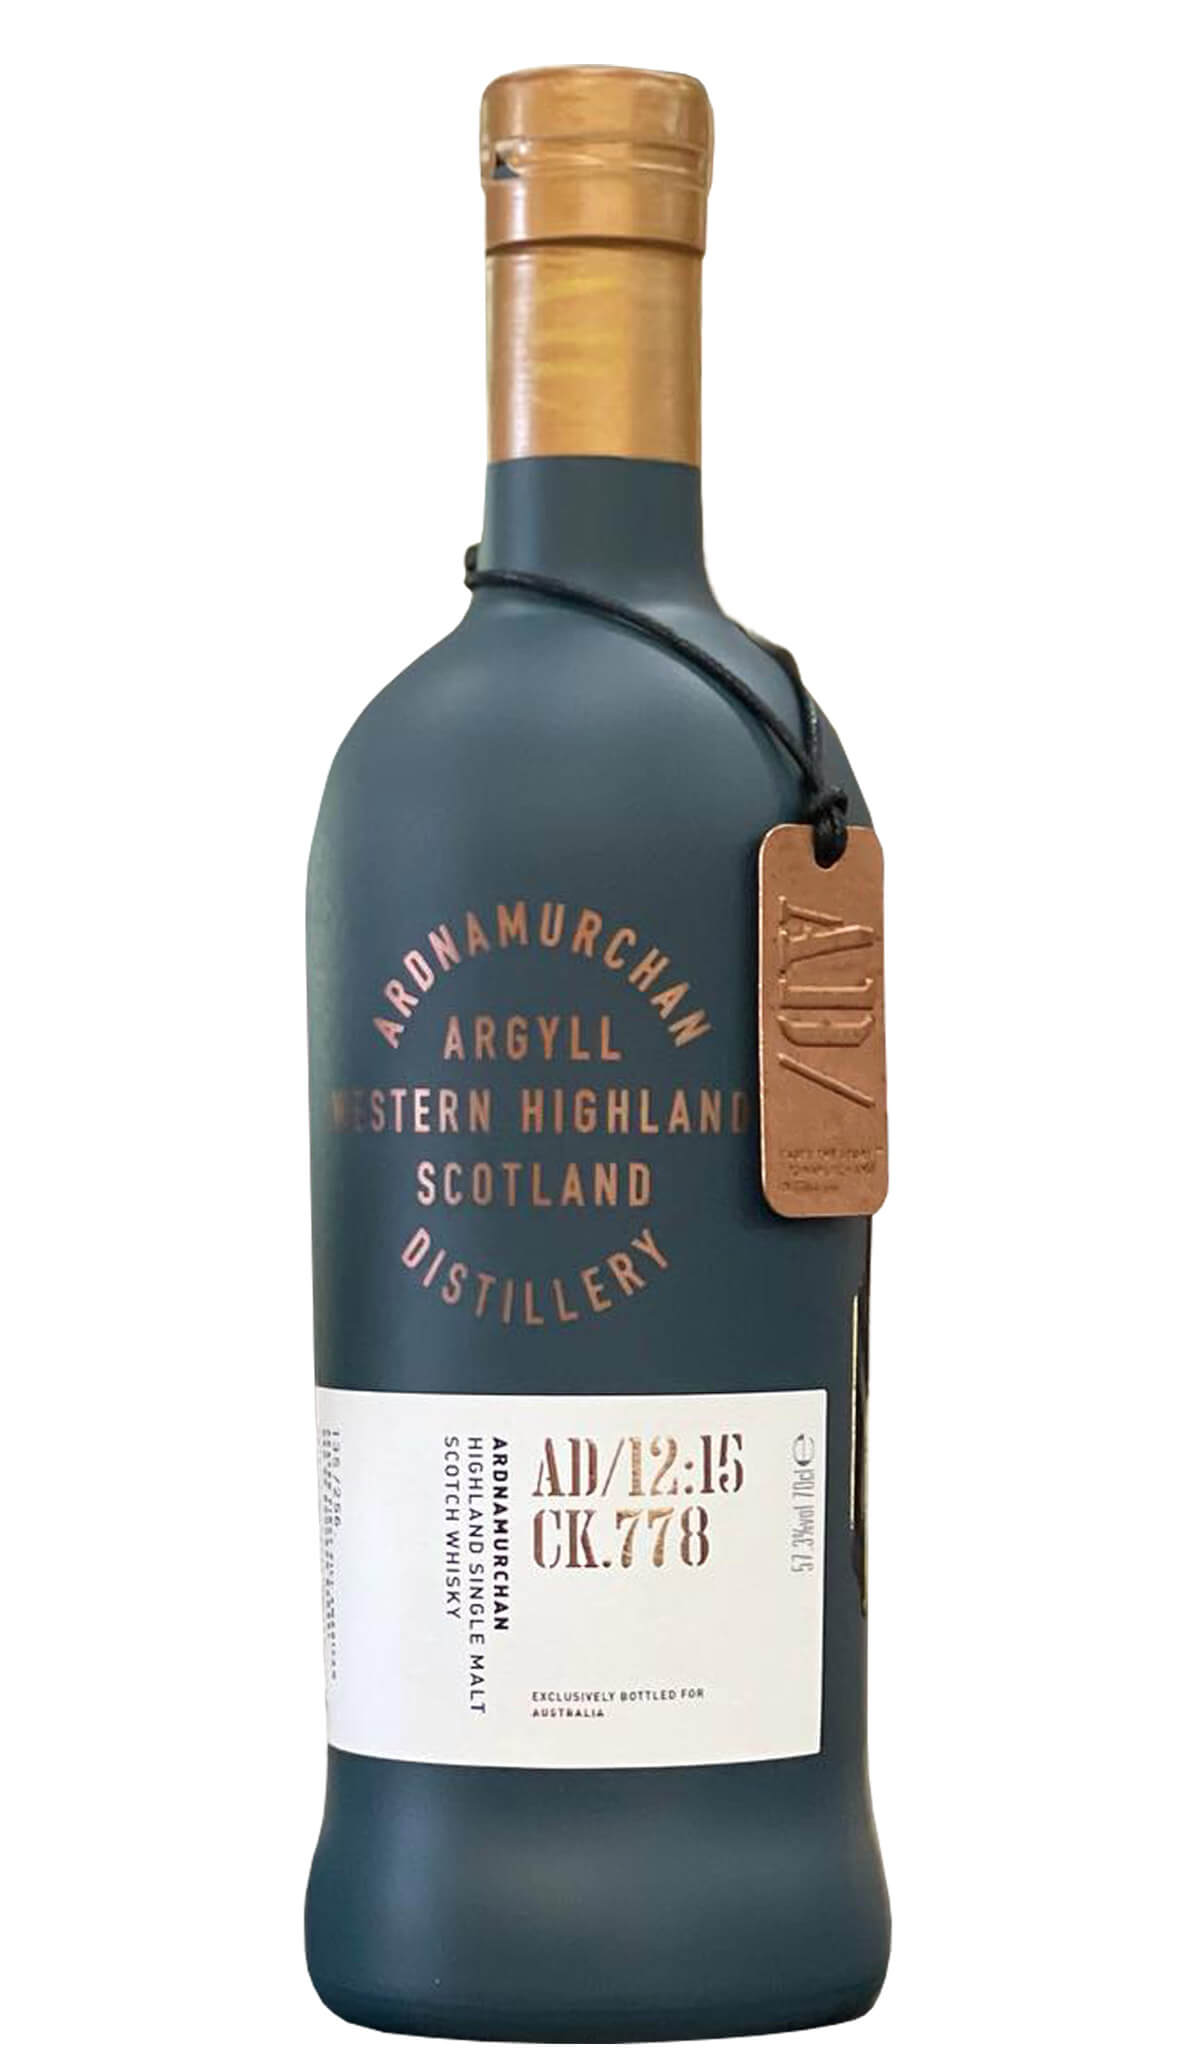 Find out more, explore the range and buy Ardnamurchan AD/12:15 CK.778 Cask Strength Single Malt Scotch Whisky 700mL available online at Wine Sellers Direct - Australia's independent liquor specialists.